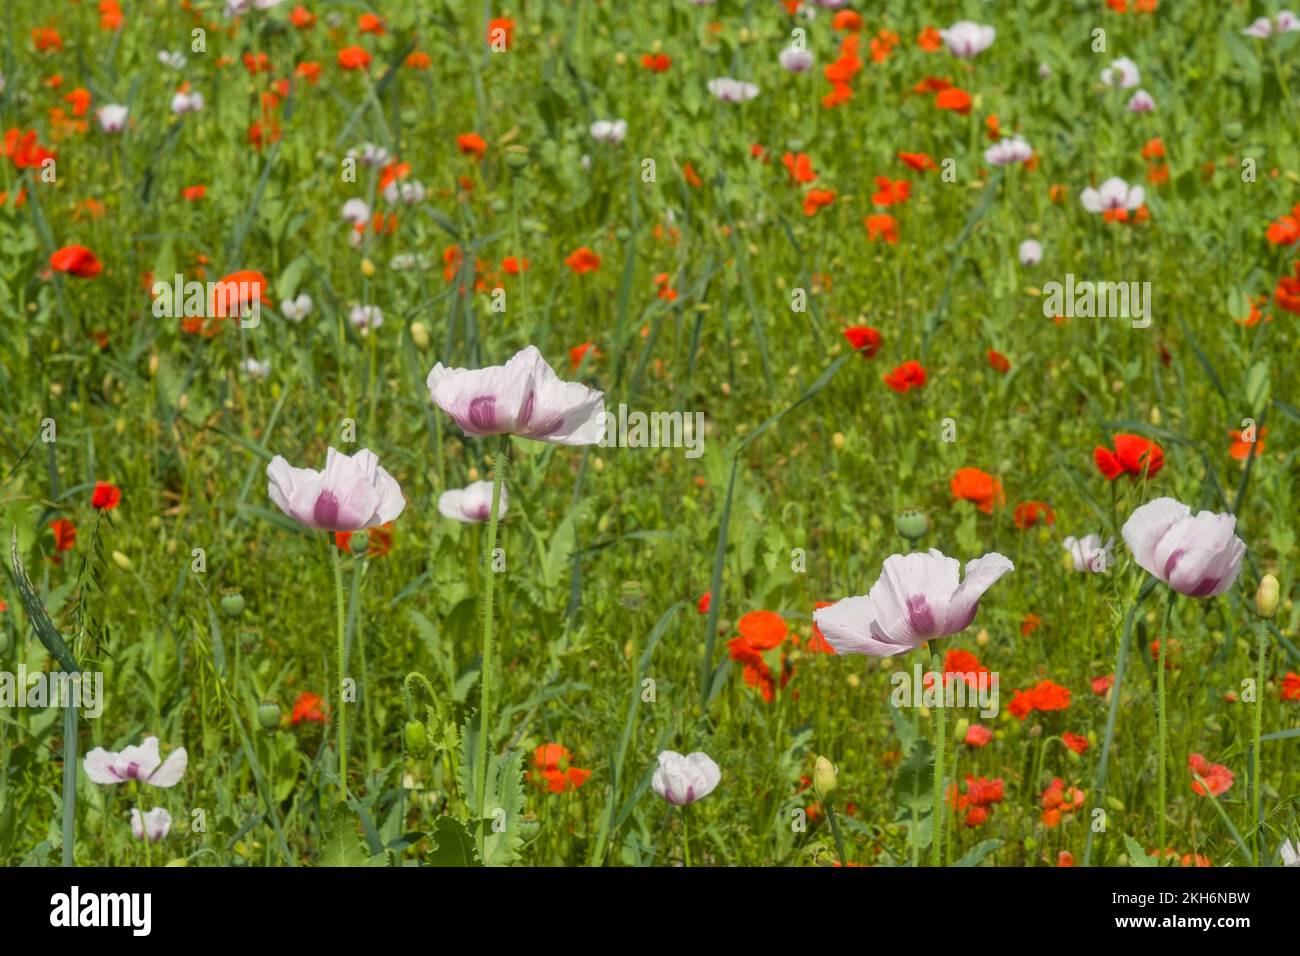 A mixed field of pink and red poppies, Papaver rhoeas and Papaver somniferum, in Summer sunshine Stock Photo